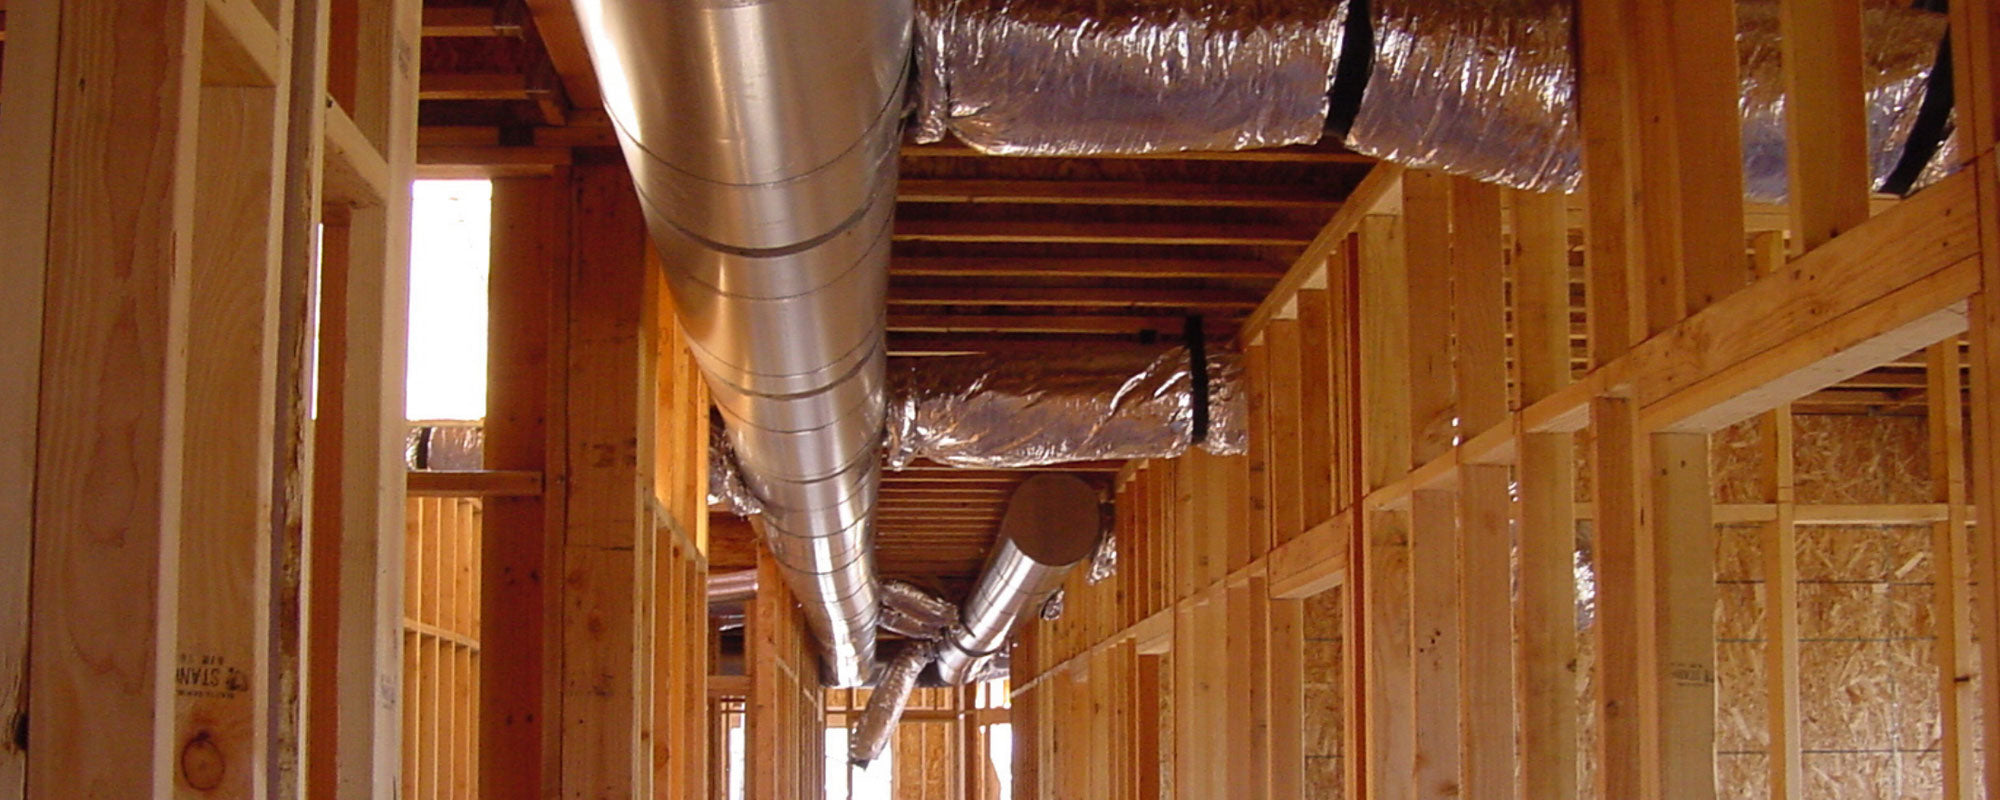 forced air heating ductwork installed in unfinished home